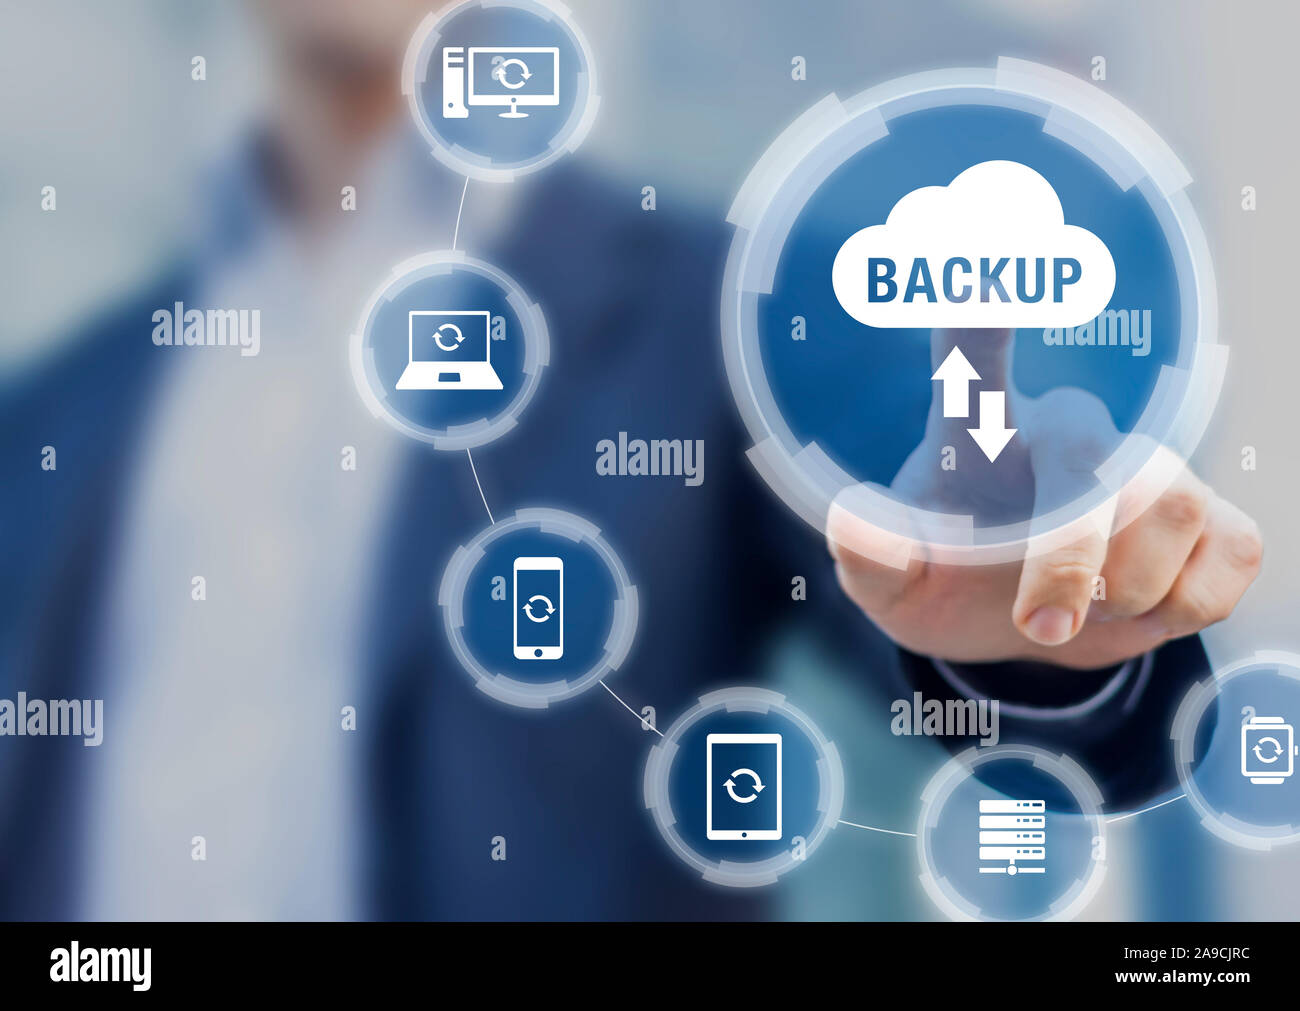 Backup files and data on internet with cloud storage technology that sync all online devices and computers with network connection, protection against Stock Photo